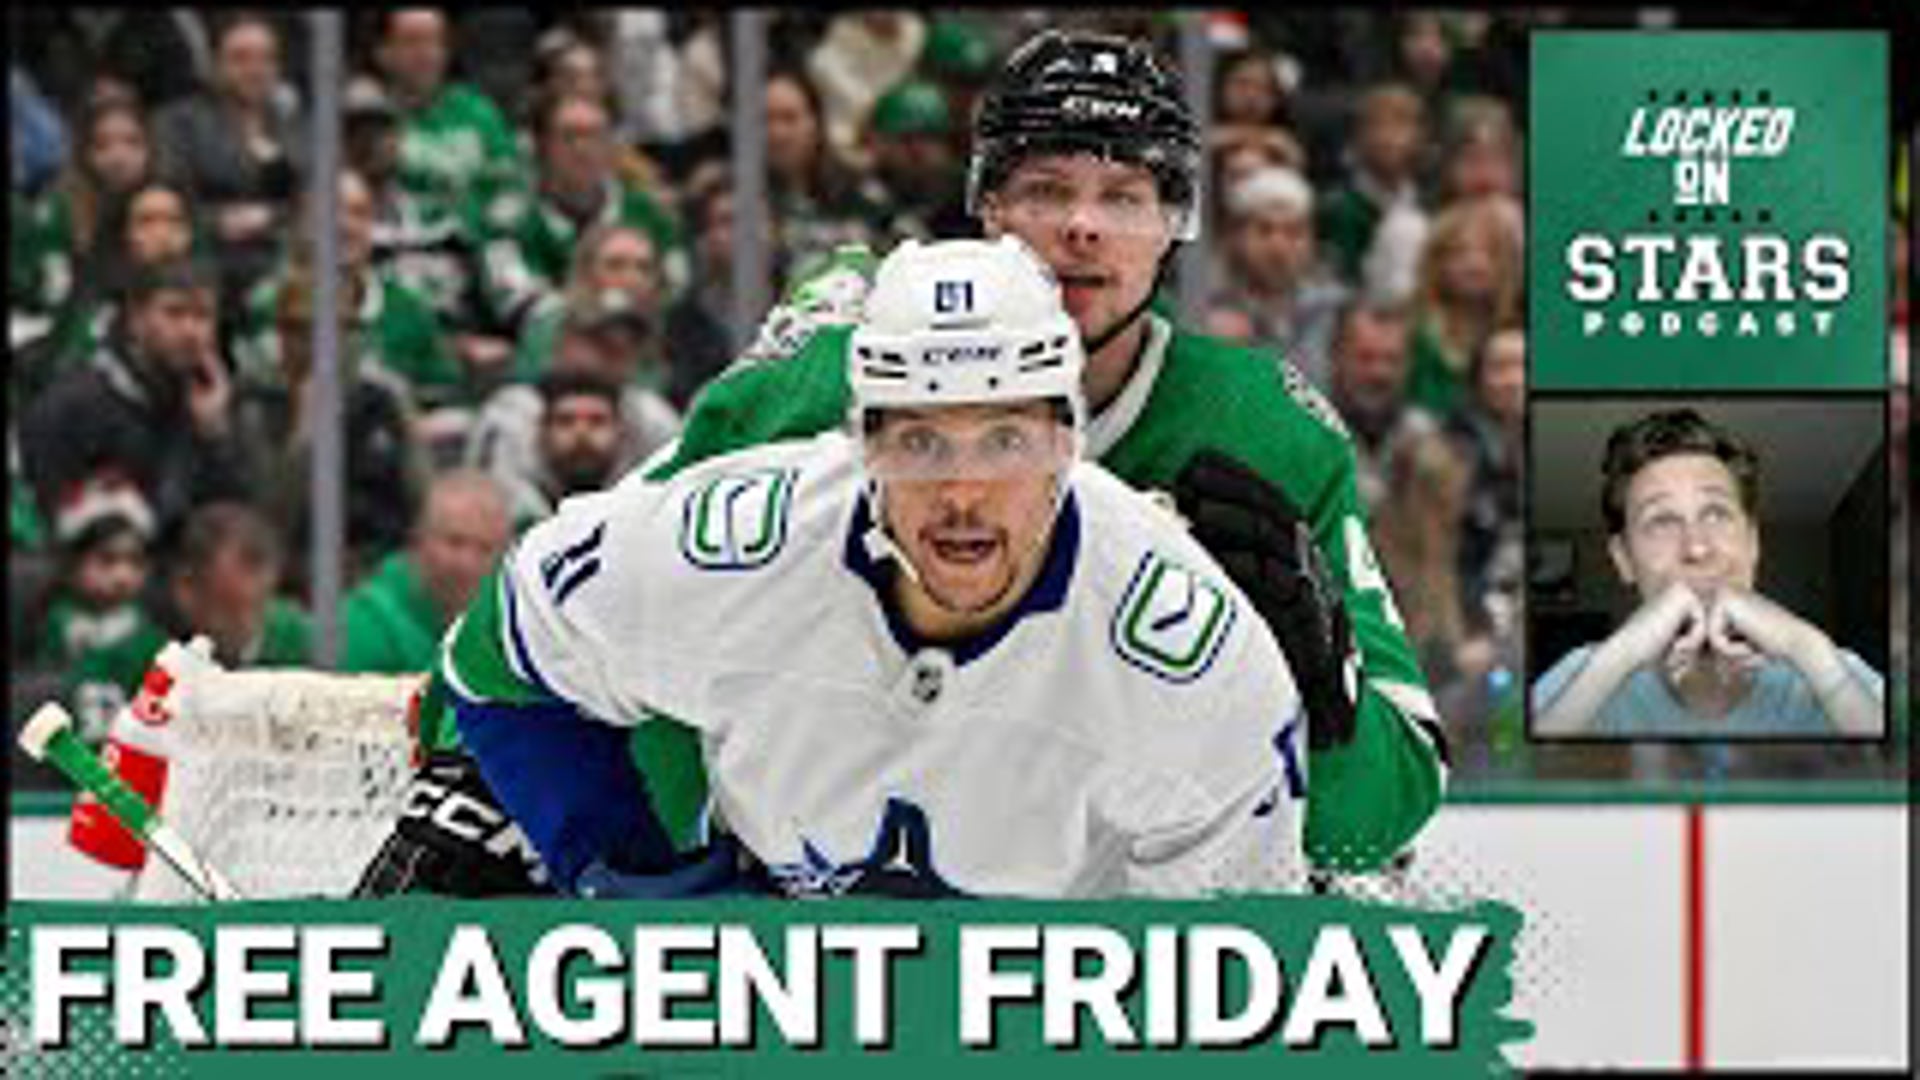 It's Free Agent Friday on Locked On Stars! On today's episode we take a look at the top free agent wingers this summer the Dallas Stars could have their eyes on.